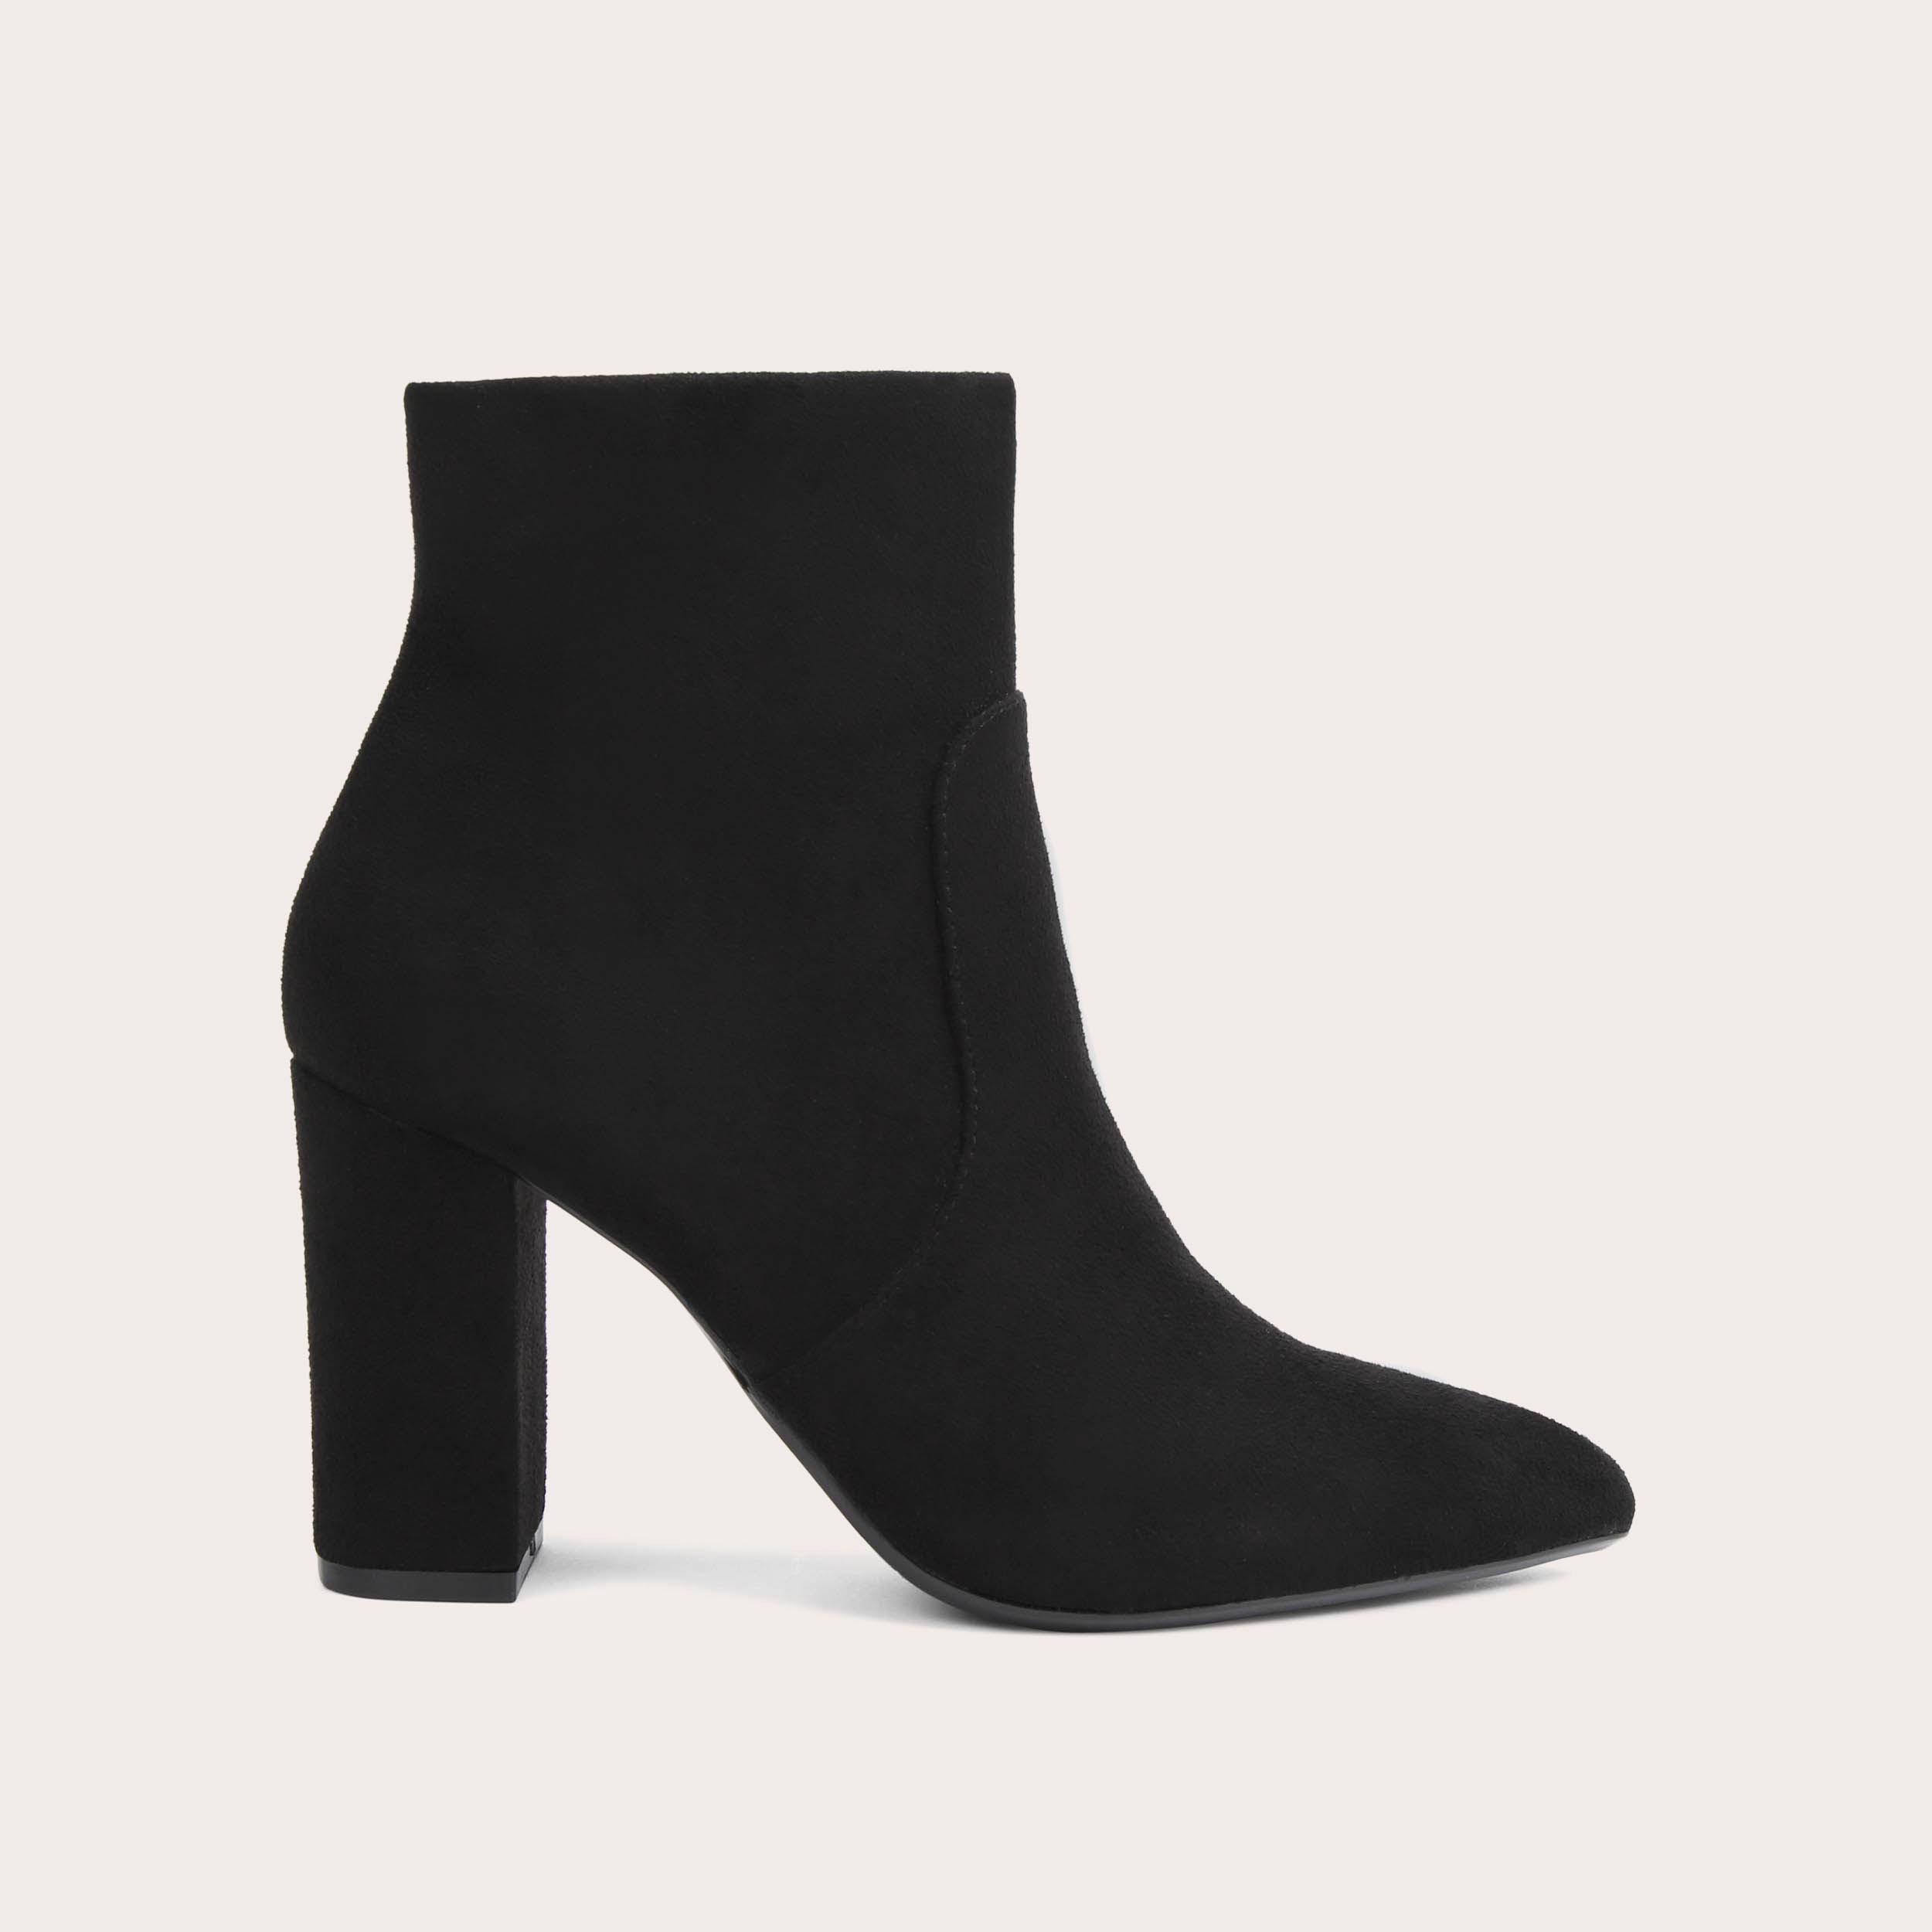 SHONE ANKLE BOOT Black Suedette Block Heel Ankle Boot by CARVELA